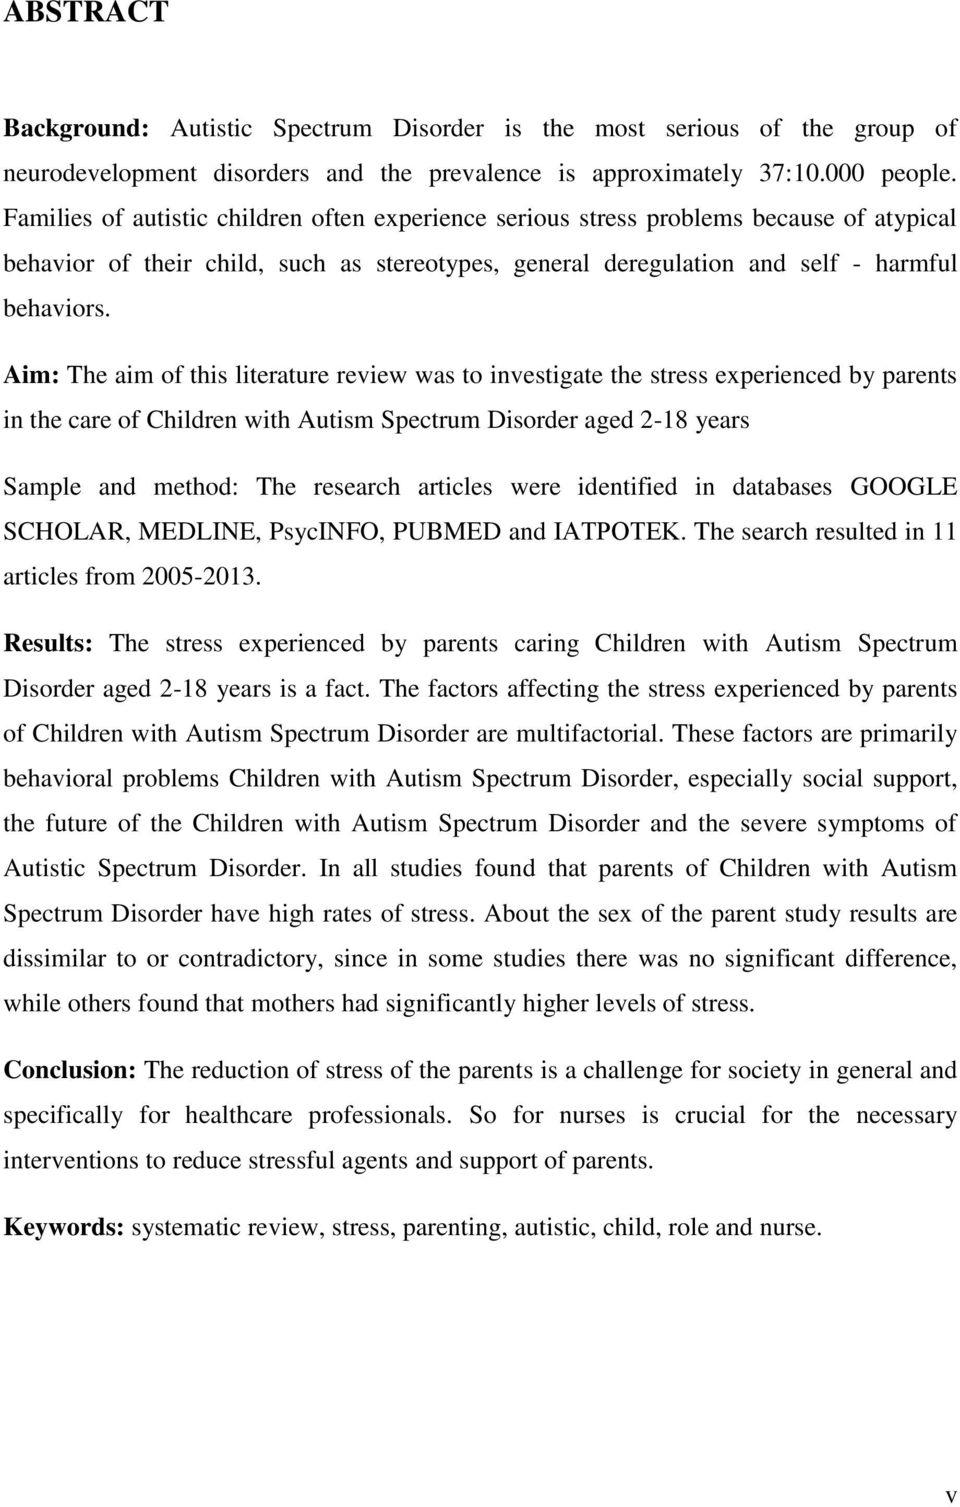 Aim: The aim of this literature review was to investigate the stress experienced by parents in the care of Children with Autism Spectrum Disorder aged 2-18 years Sample and method: The research